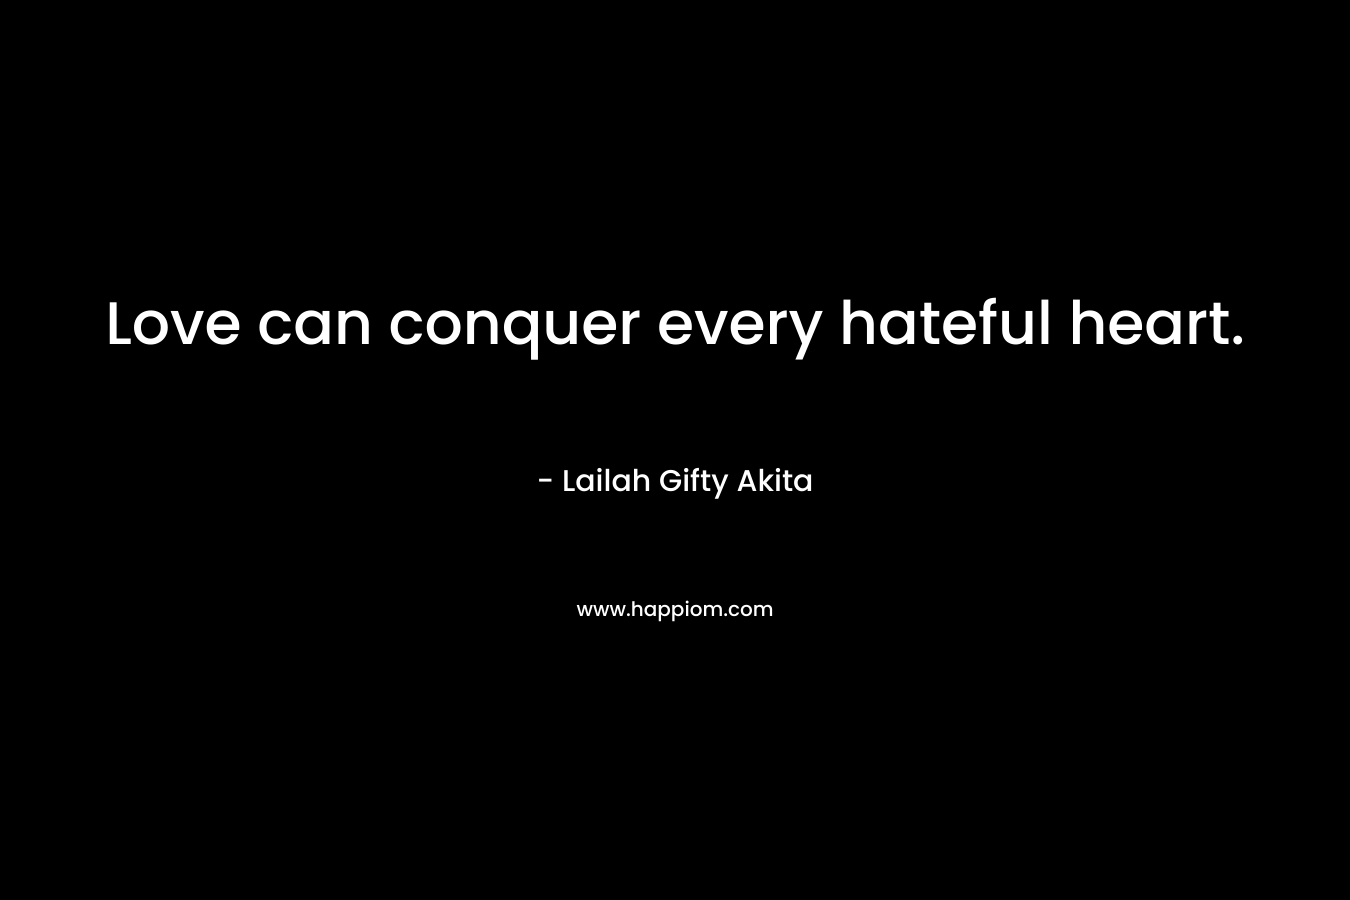 Love can conquer every hateful heart.